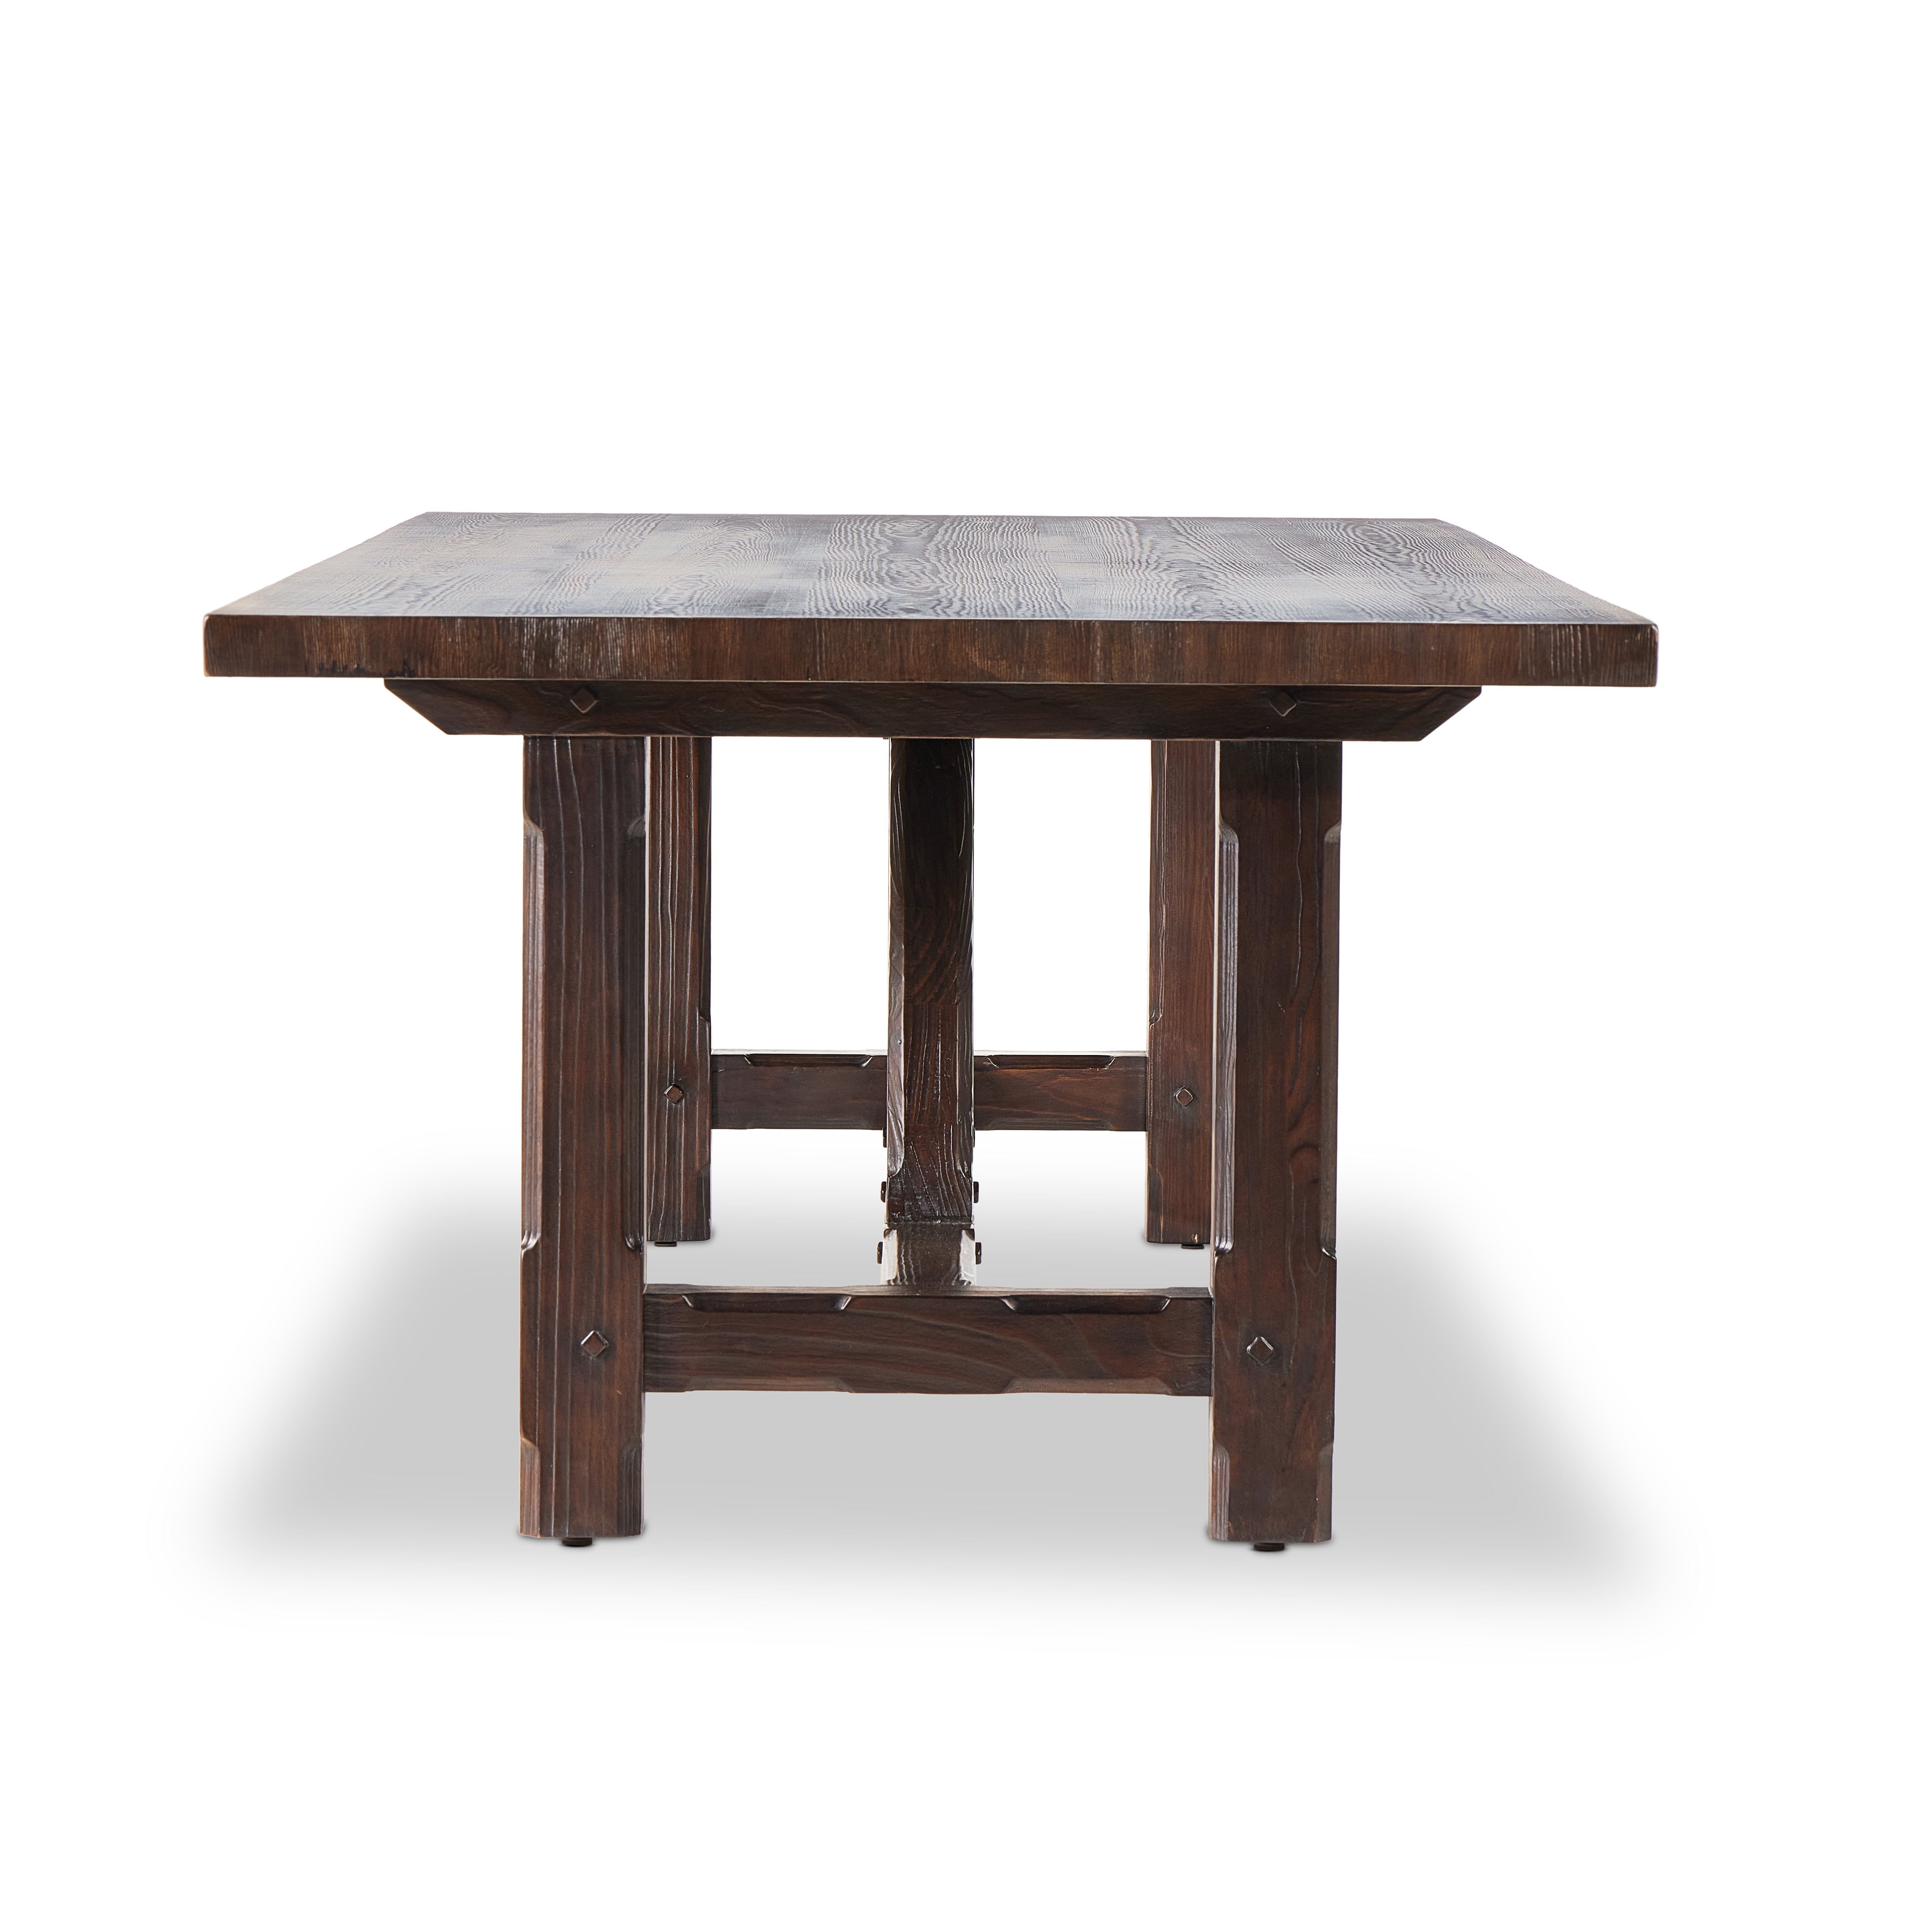 The Arch Dining Table-Medium Brown Fir - Image 3